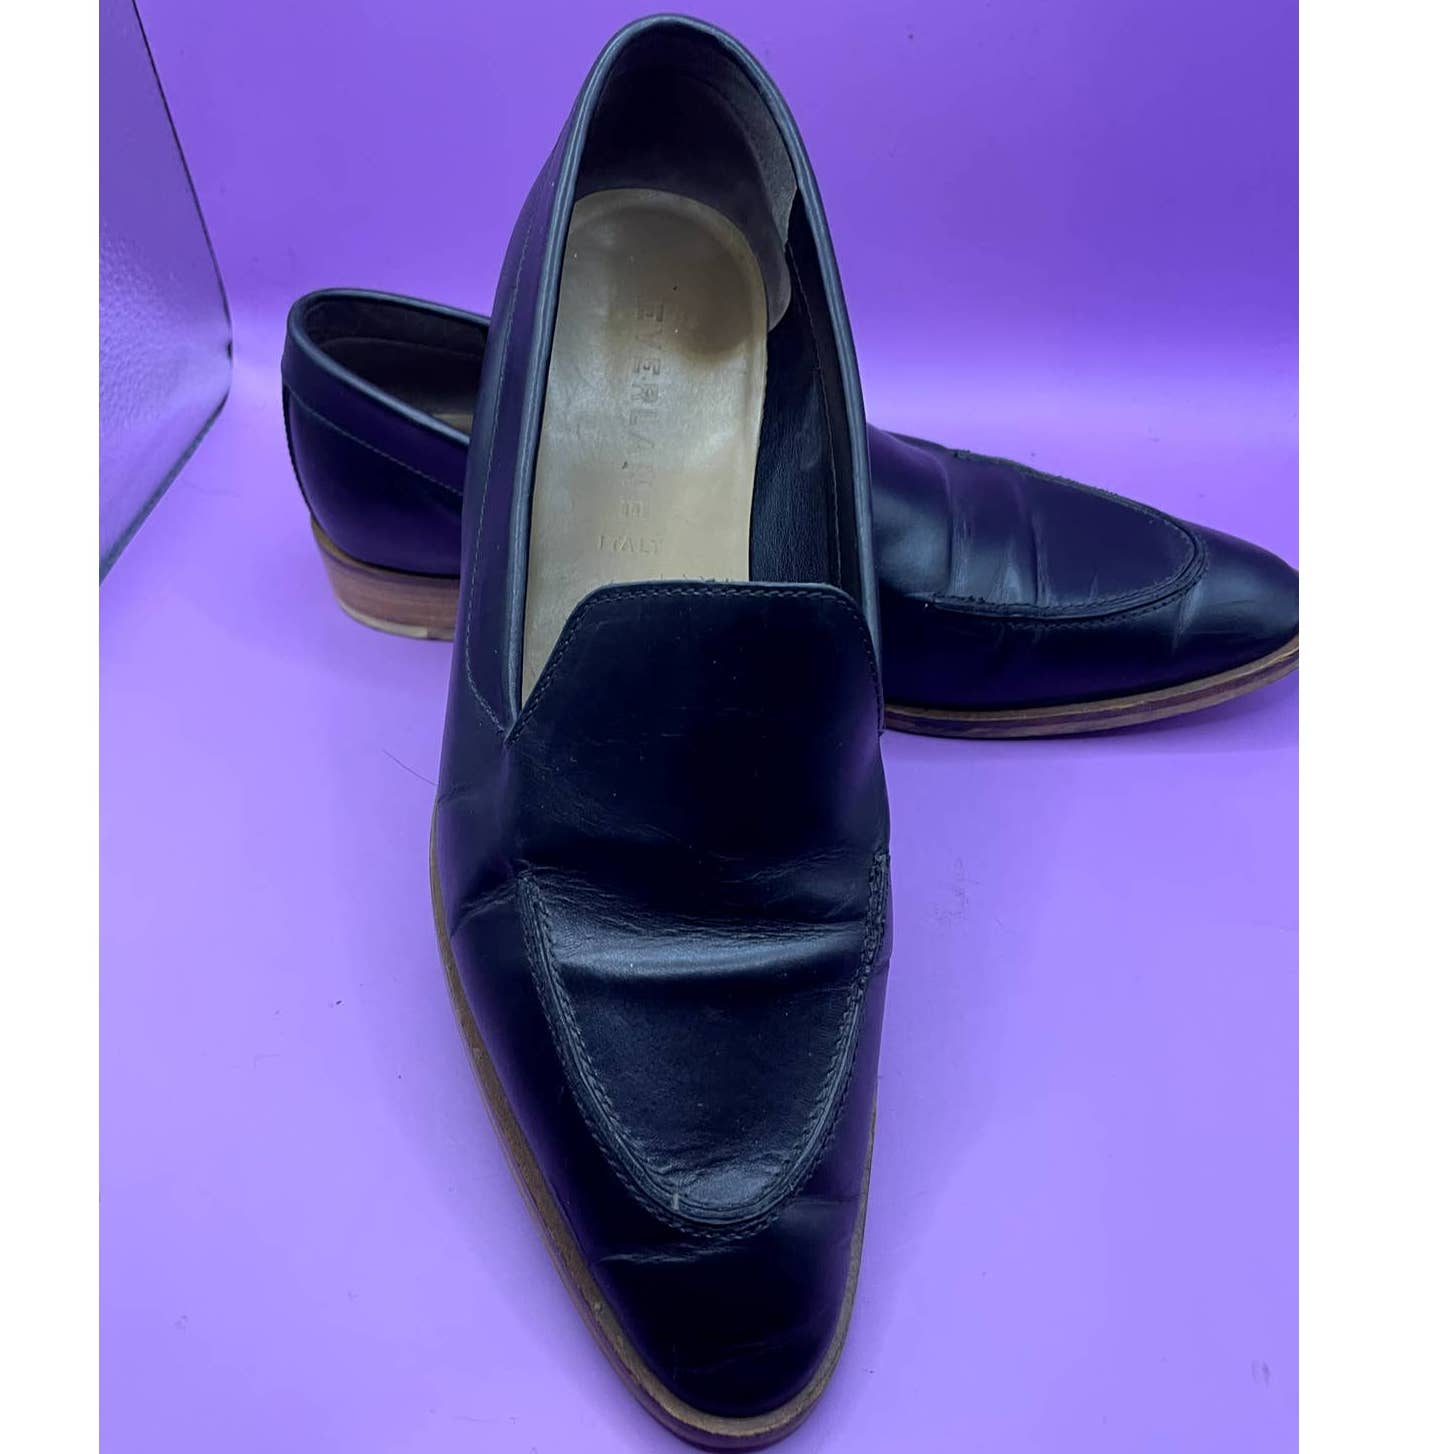 Everlane Black Leather Pointed Toe Loafers - 9.5